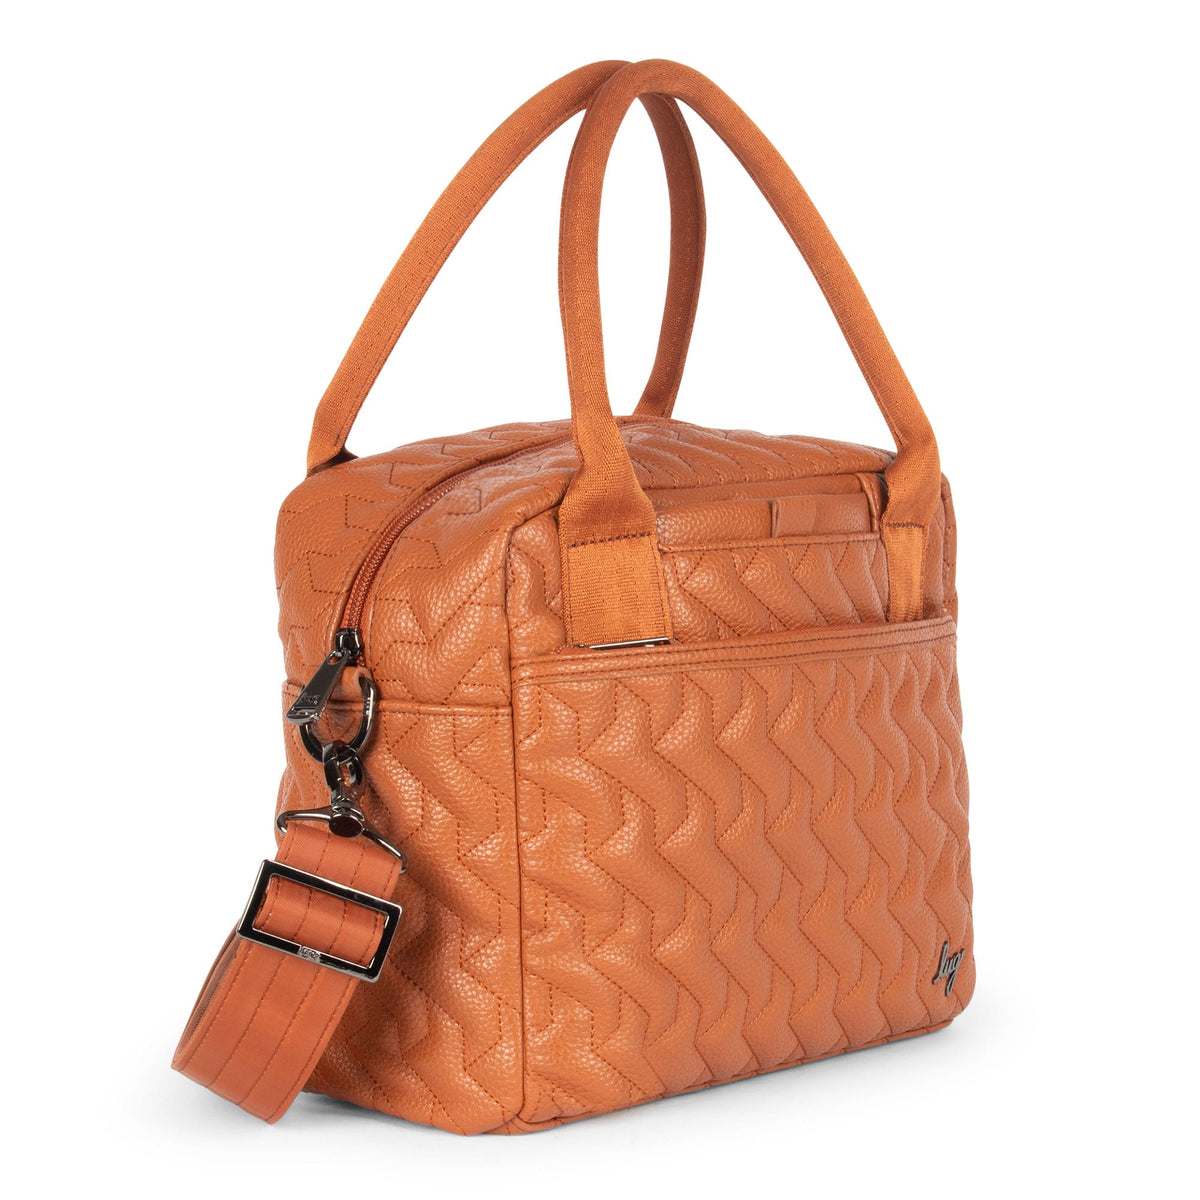 The Classic Cross-body Bag in Copper Leather